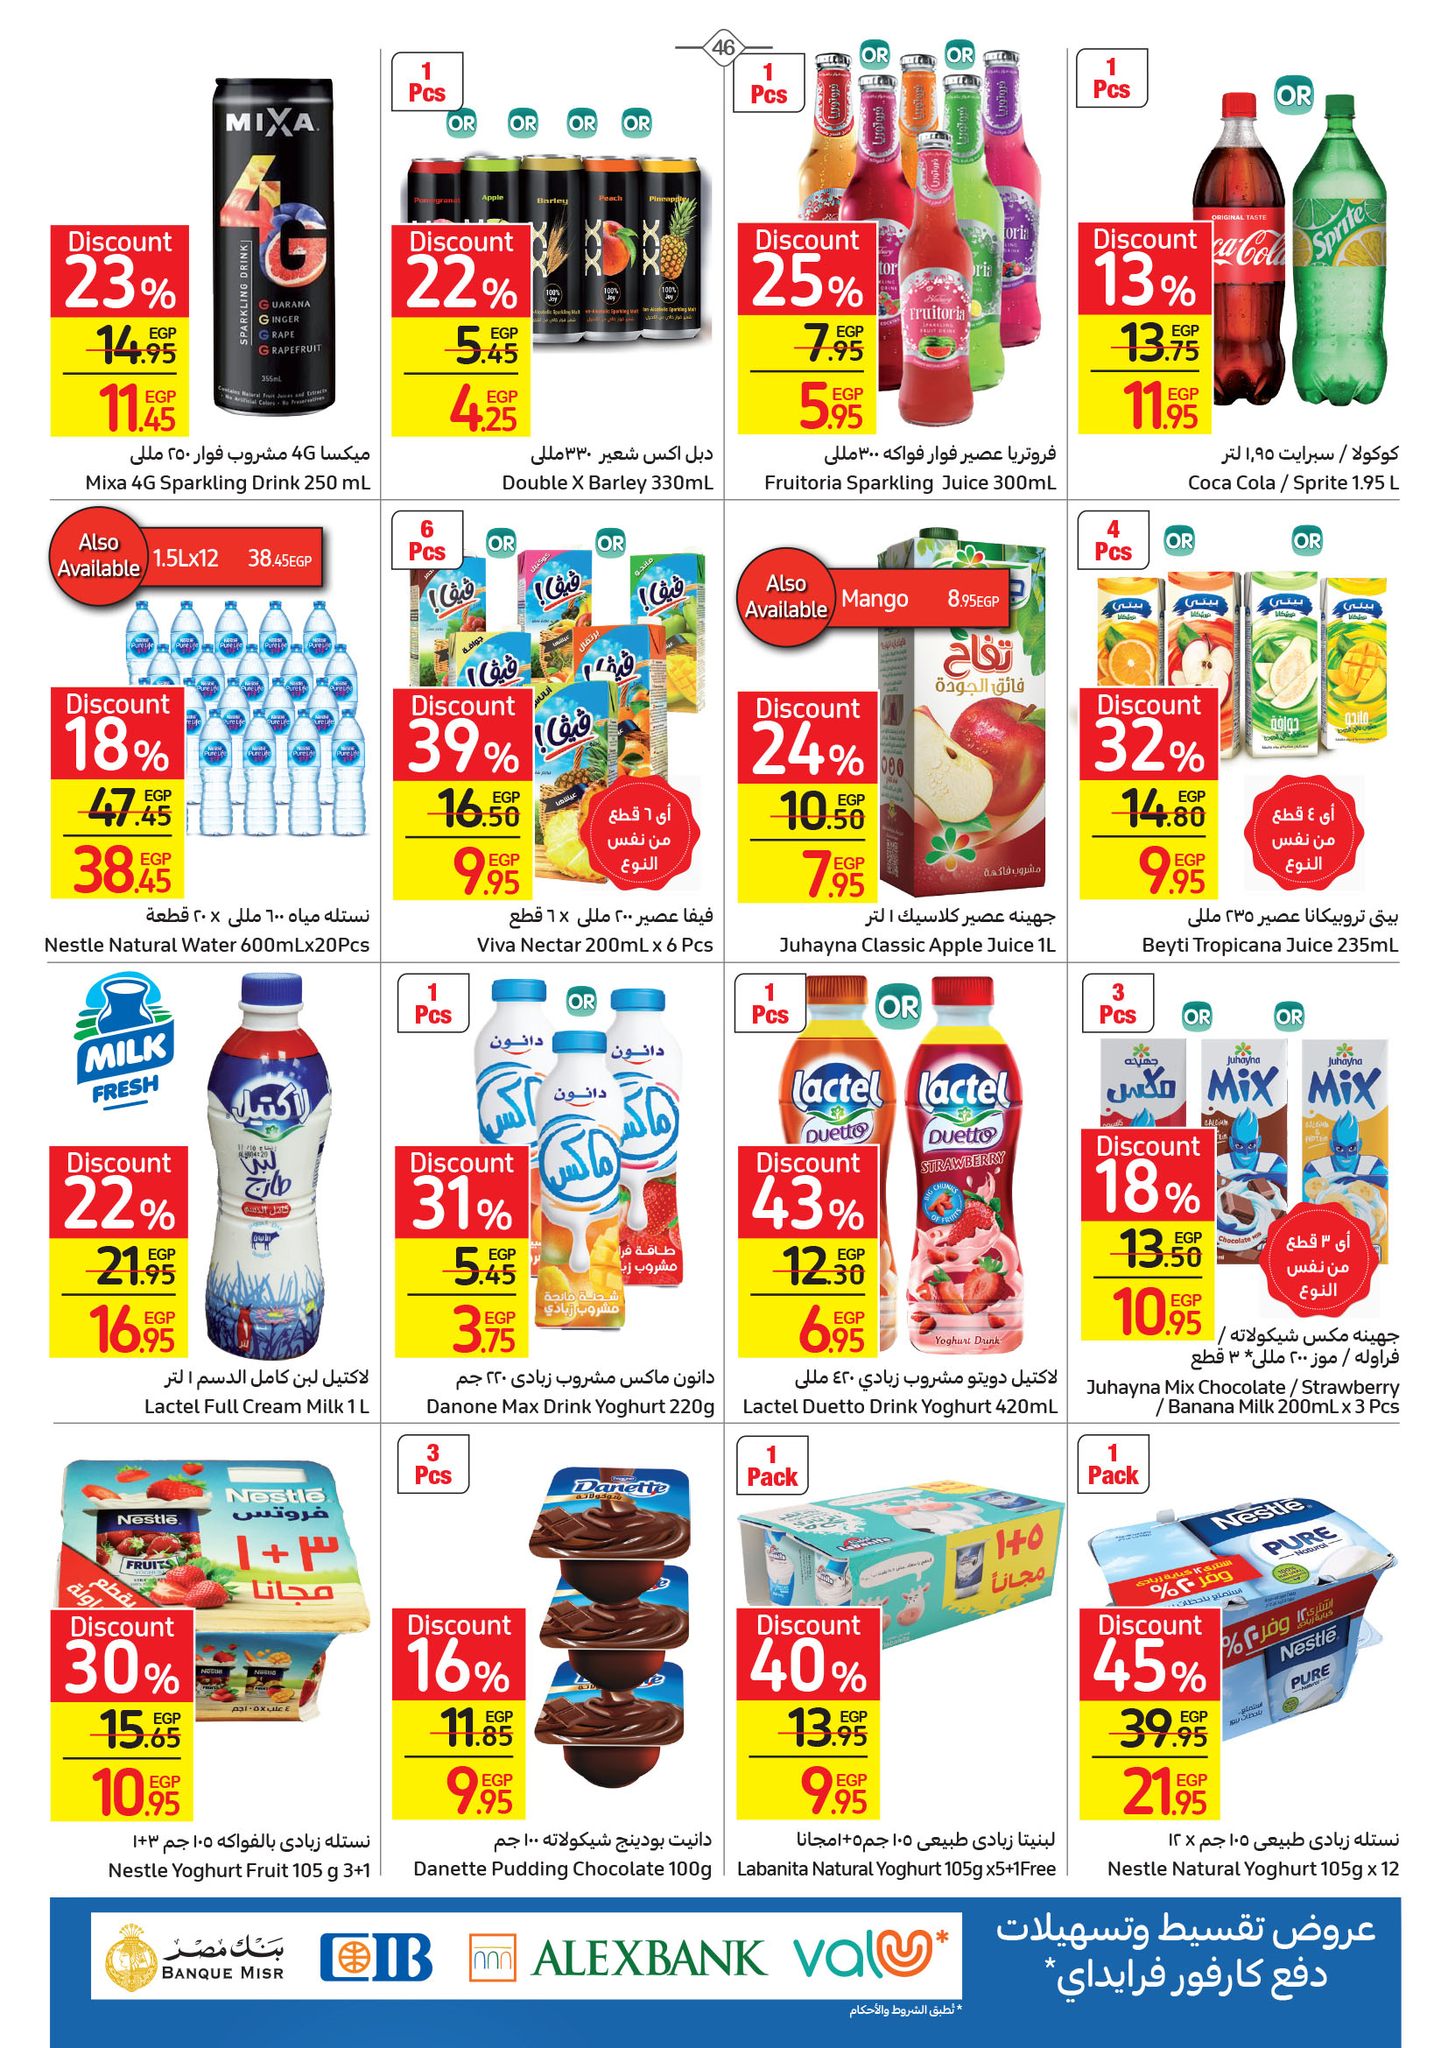 Watch the latest Carrefour half price offers "Last Chance Offer" until December 4 46